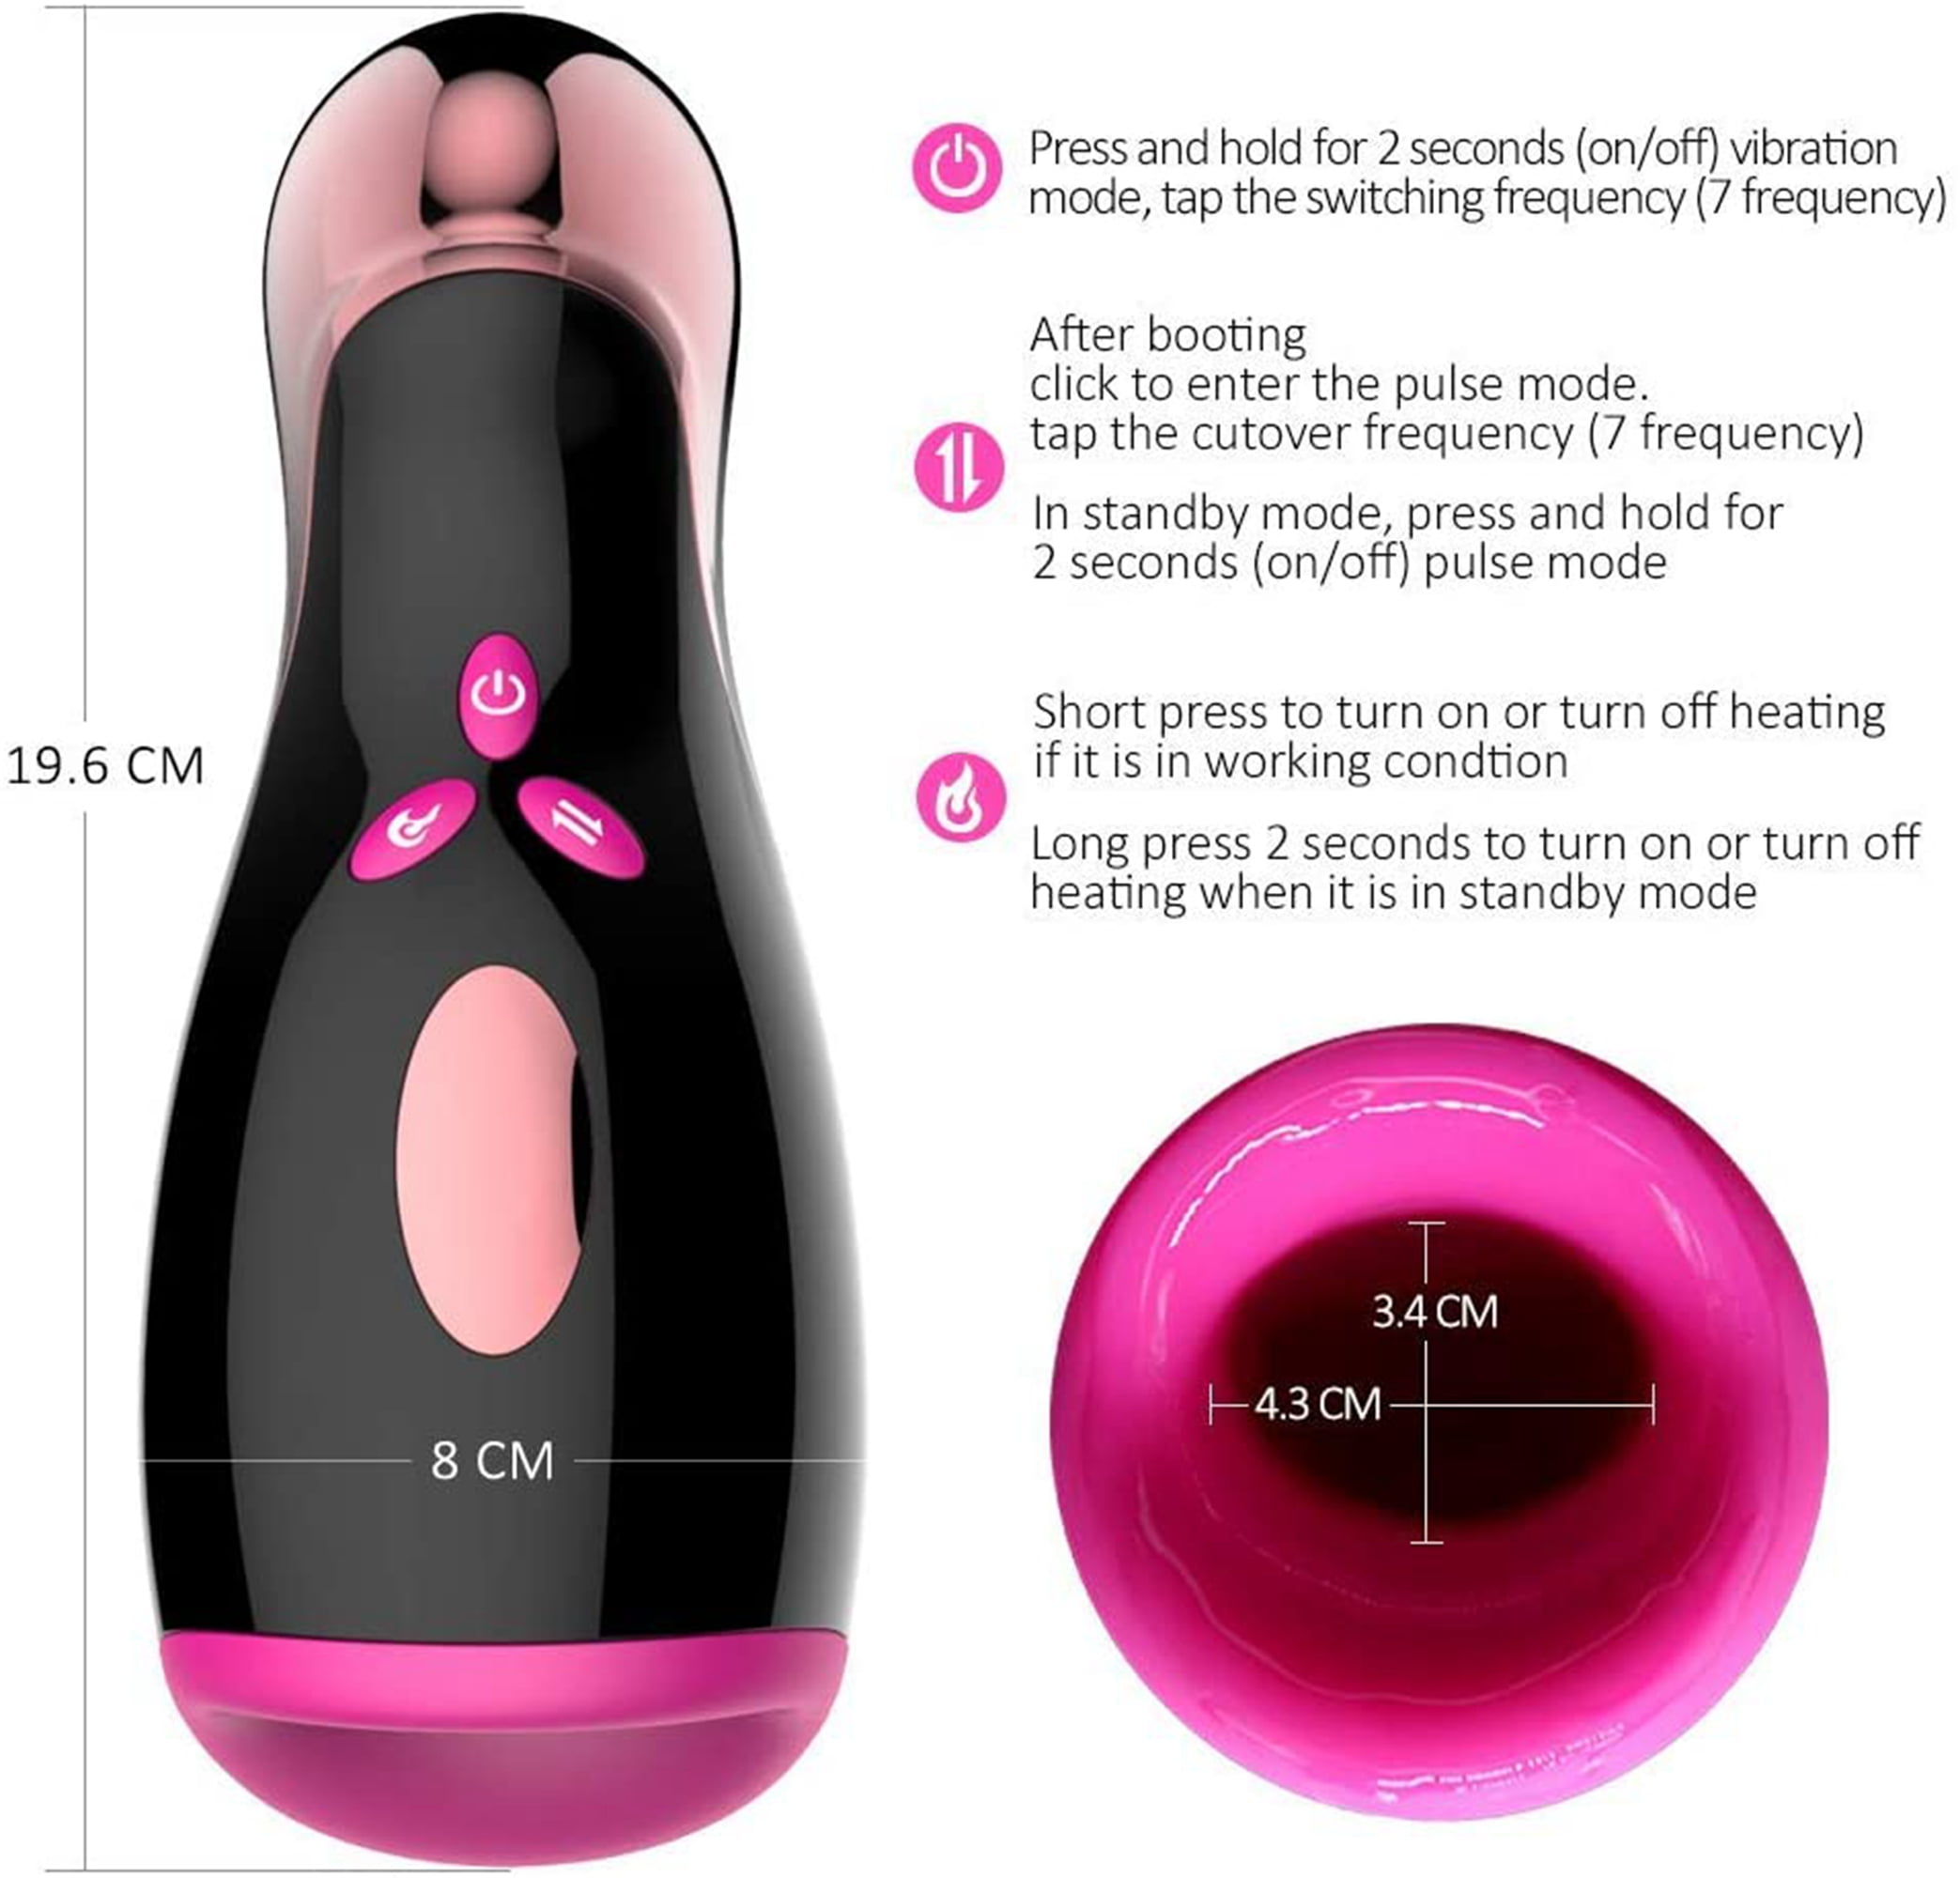 FESXTY Automatic Male Masturbator Cup with 7 Thrusting Vibration Stimulation, Electric Sex Toy, Adult Sex Toys for